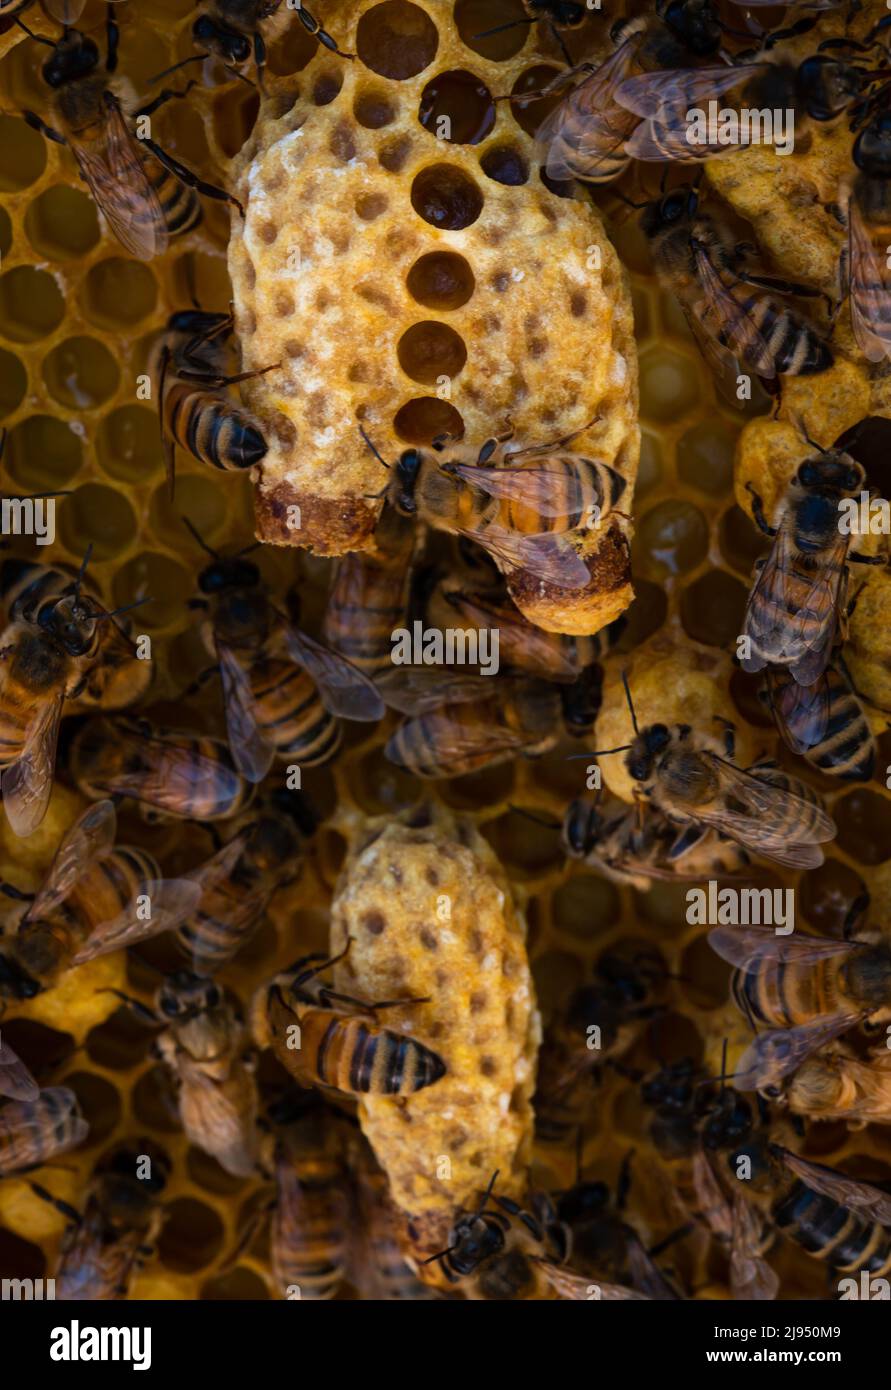 Three emergency queen cells in a honey bee hive Stock Photo